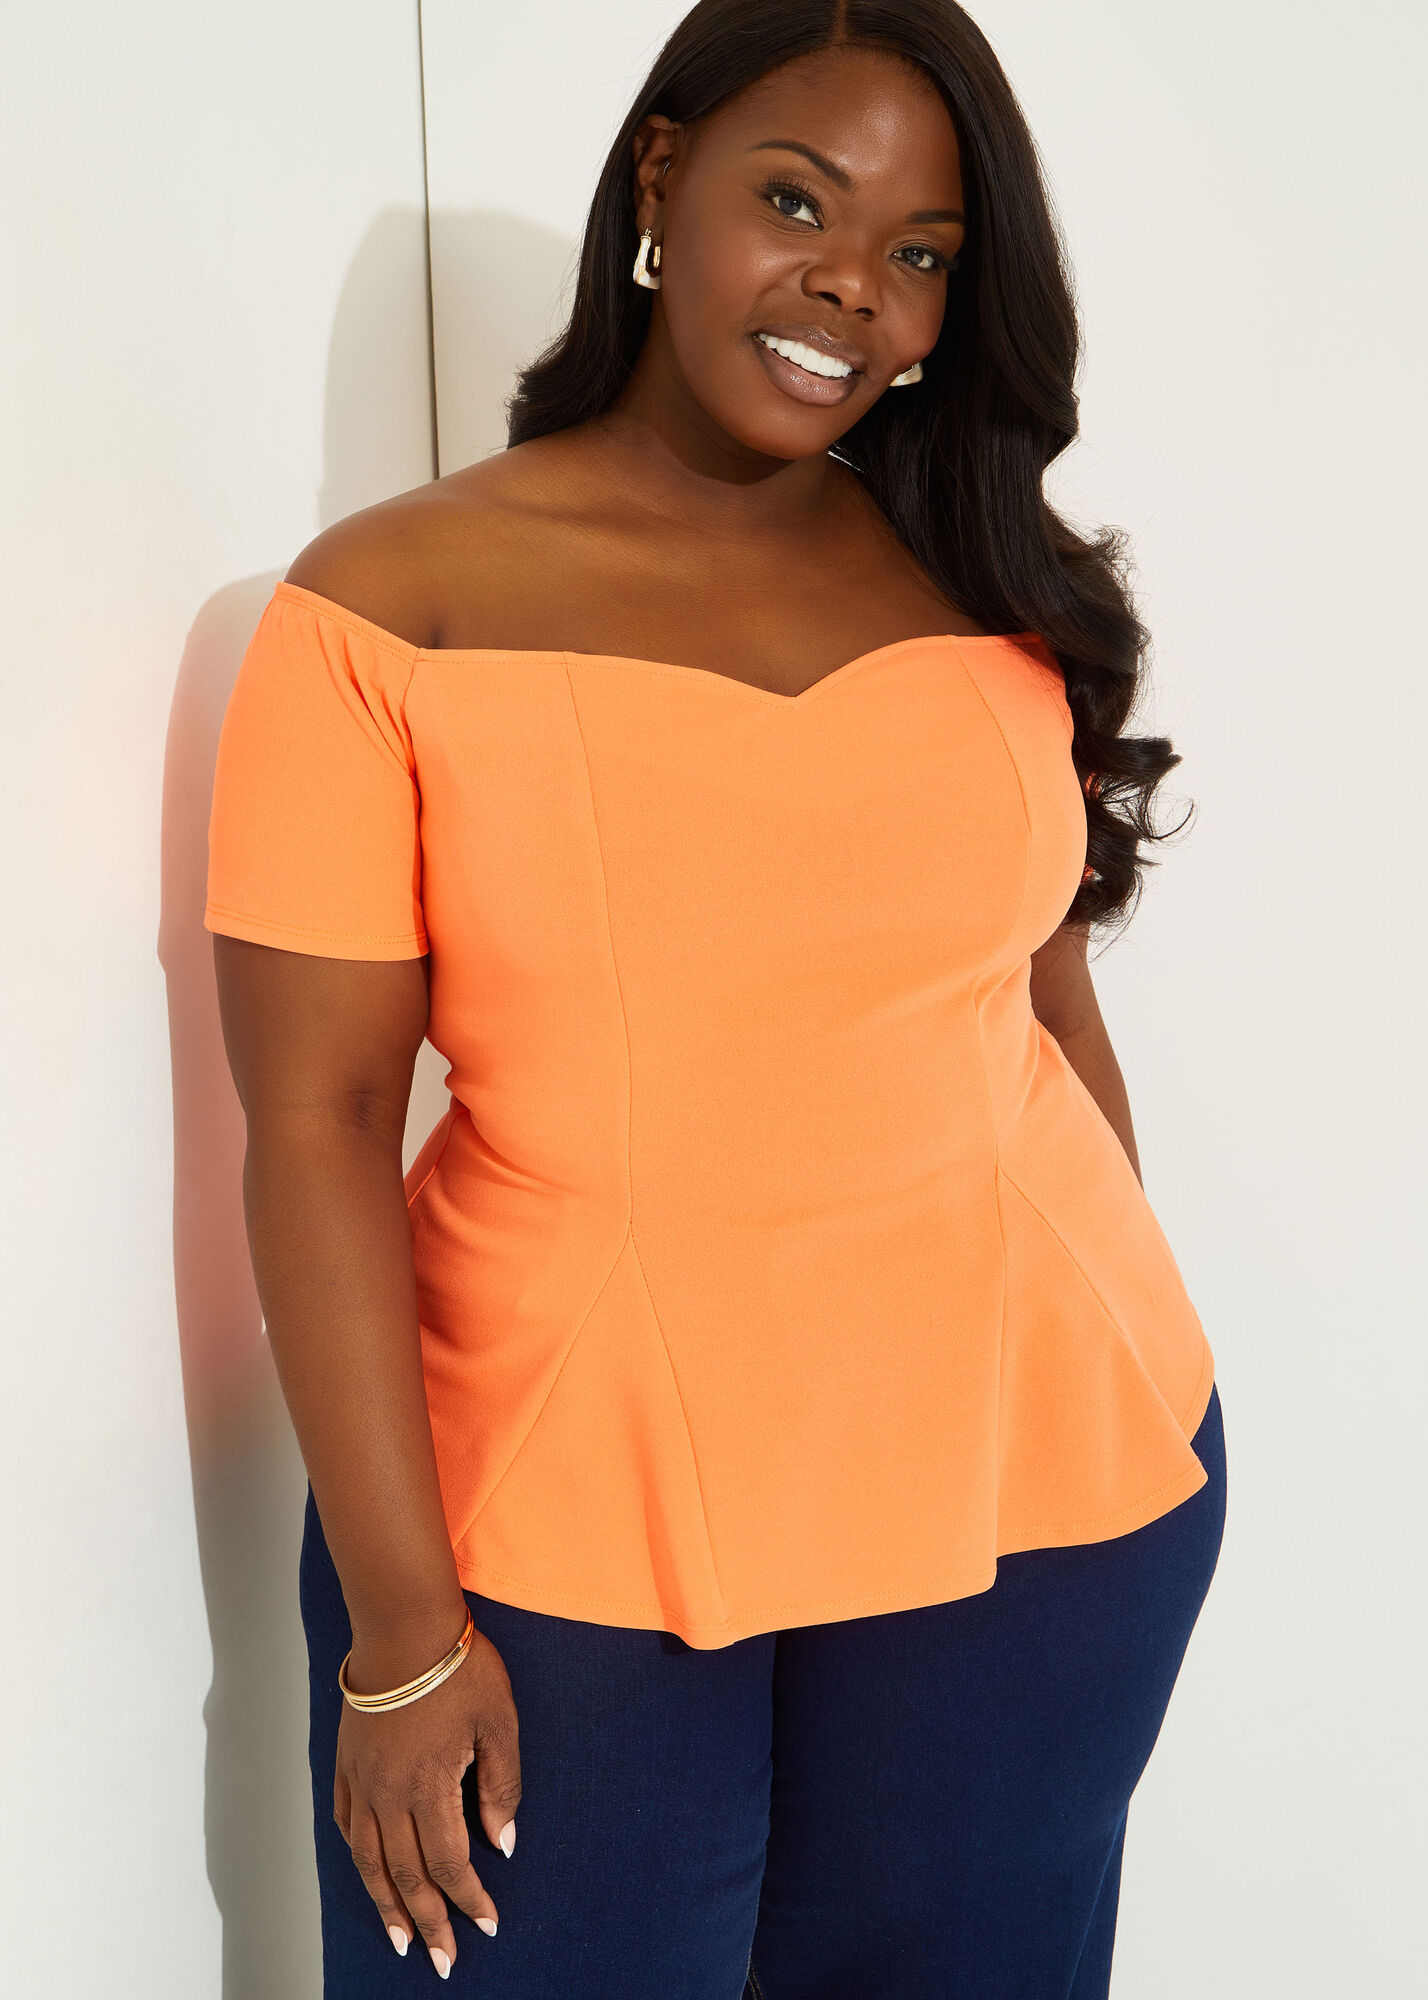 Plus Size the shoulder tops size top plus size spring top